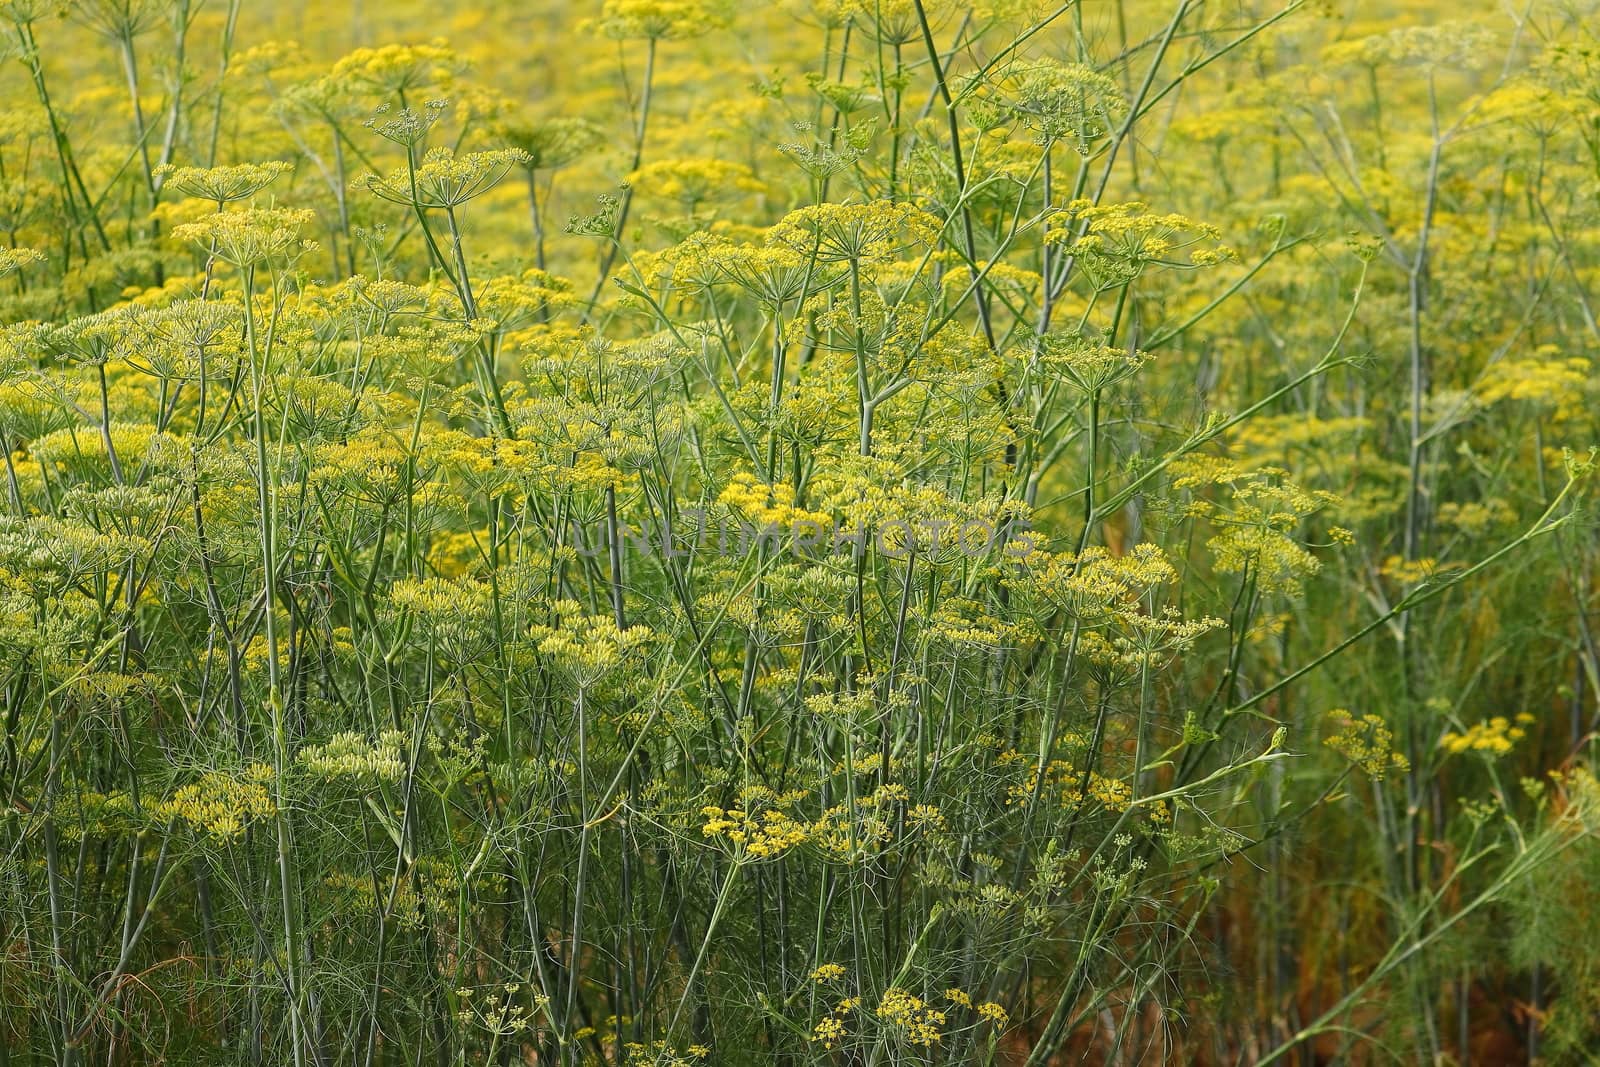 flowers of organic fennel (dill) plants, INDIA by 9500102400